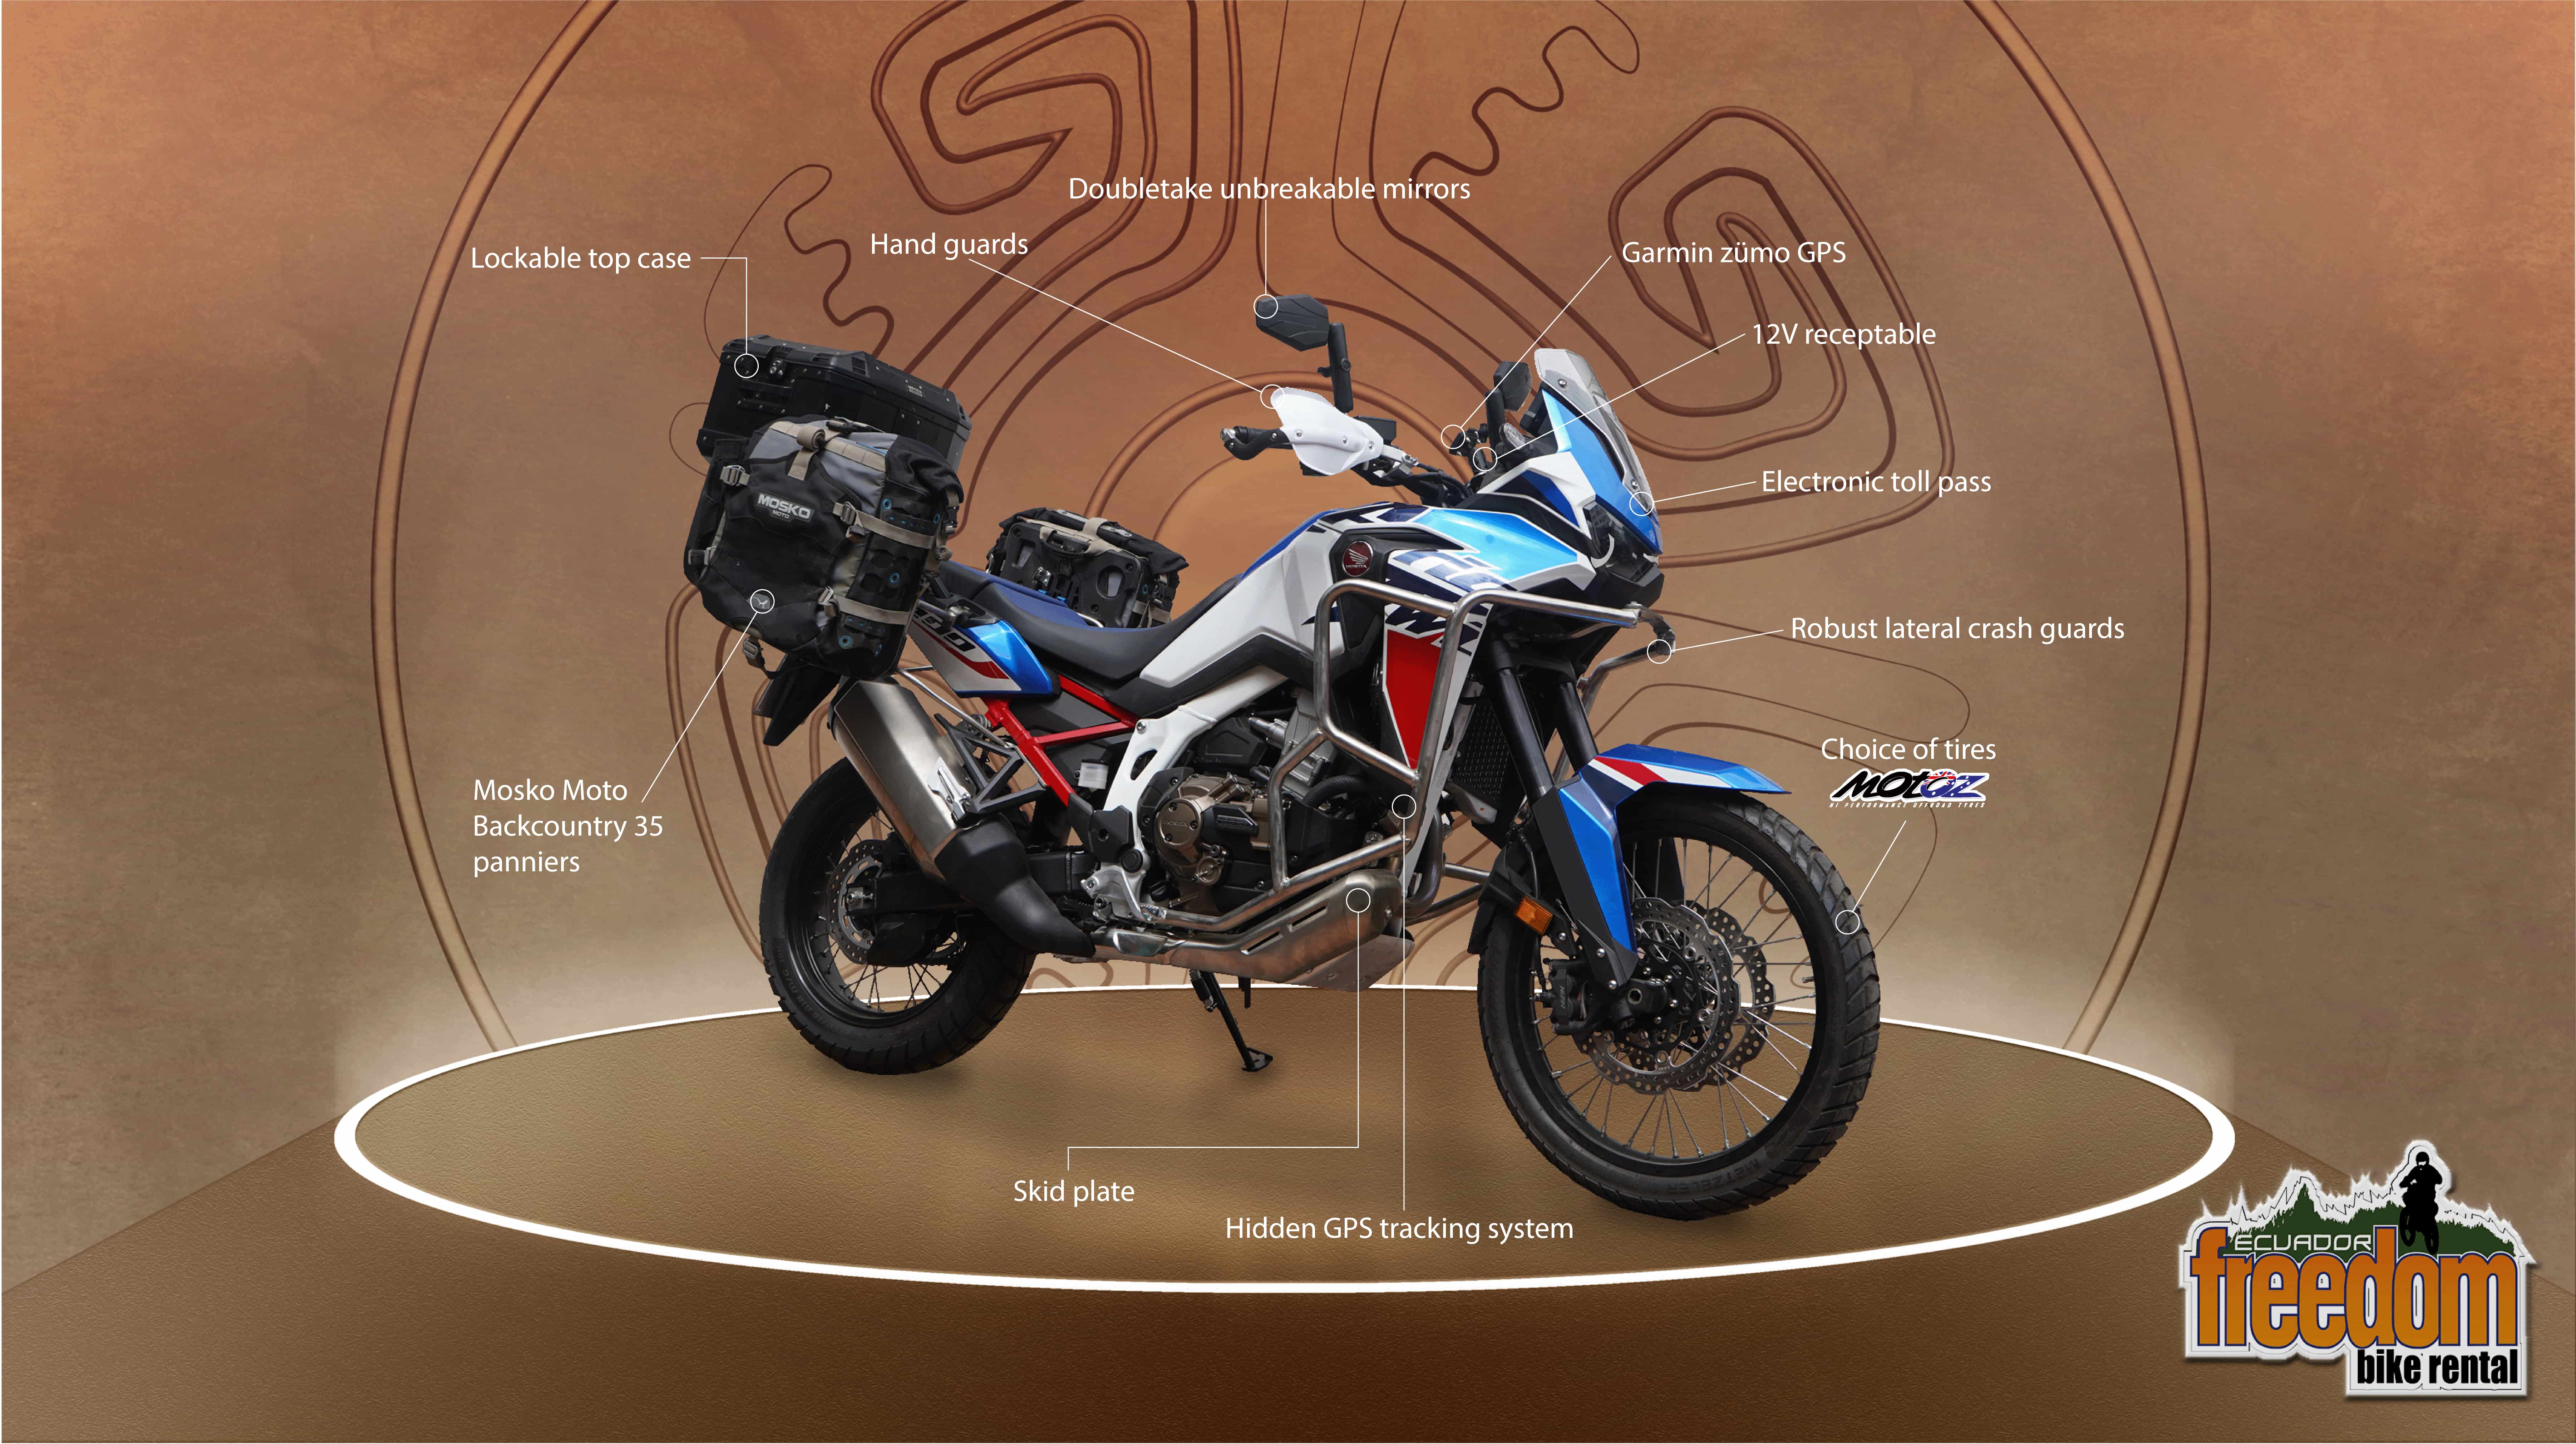 Motorcycle Rental - Honda Africa Twin with DCT in Quito, Ecuador, South America